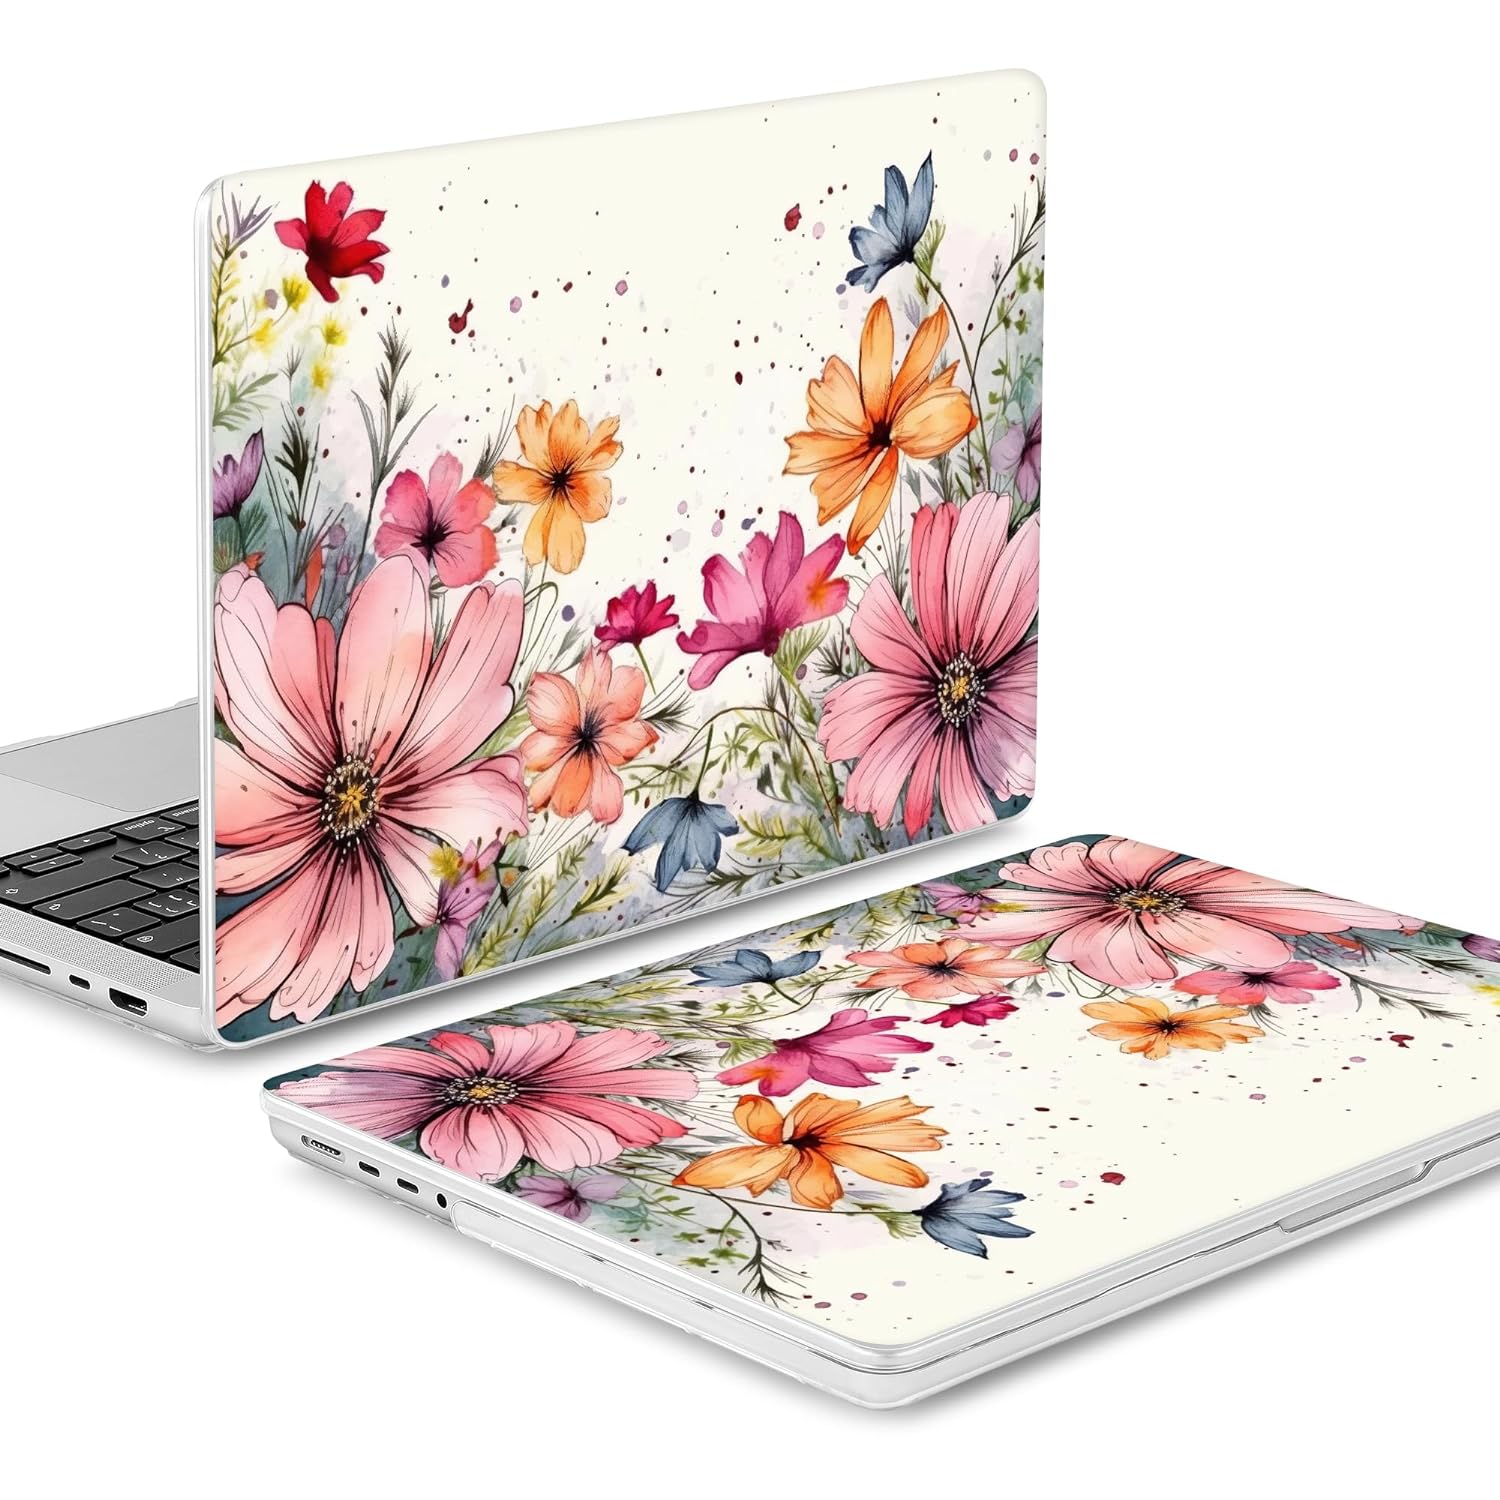 Mektron Case for M3 MacBook Pro 16" M1 A2485/M2 A2780 (2021/2023) with Touch ID, Hard Shell Plastic Laptop Cover Keyboard Skin Compatible MacBook Pro 16.2" M1 Pro/Max Chips, Colorful Floral